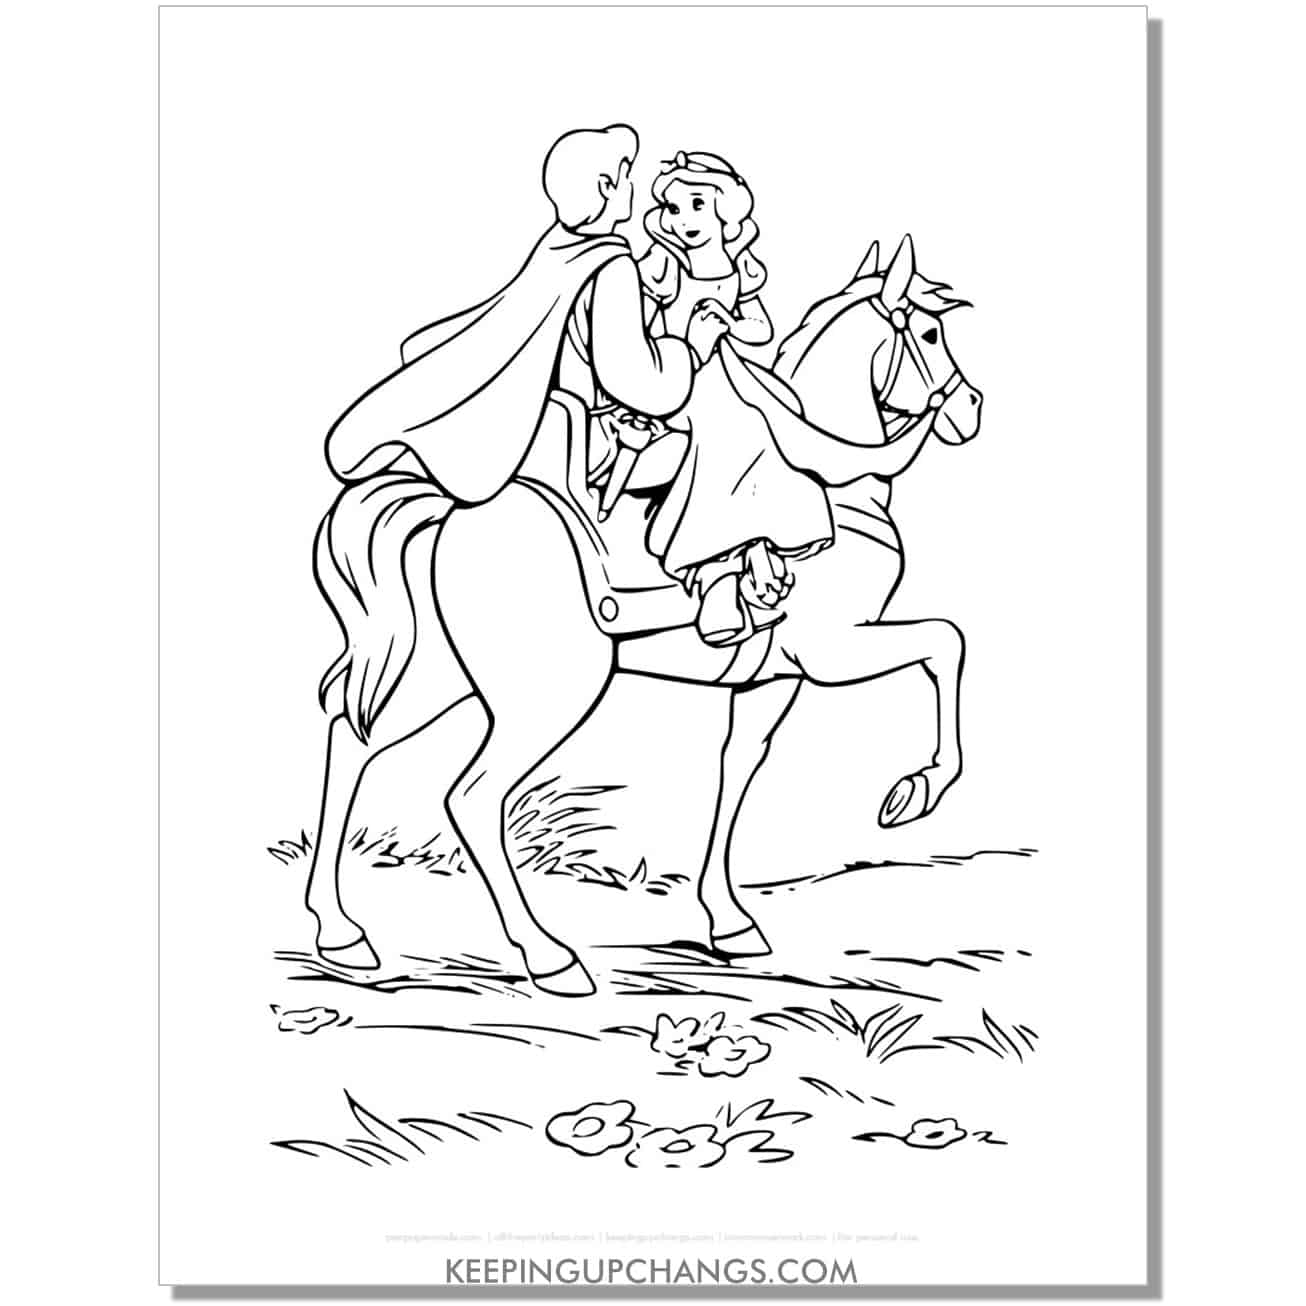 snow white on horseback with prince charming coloring page, sheet.